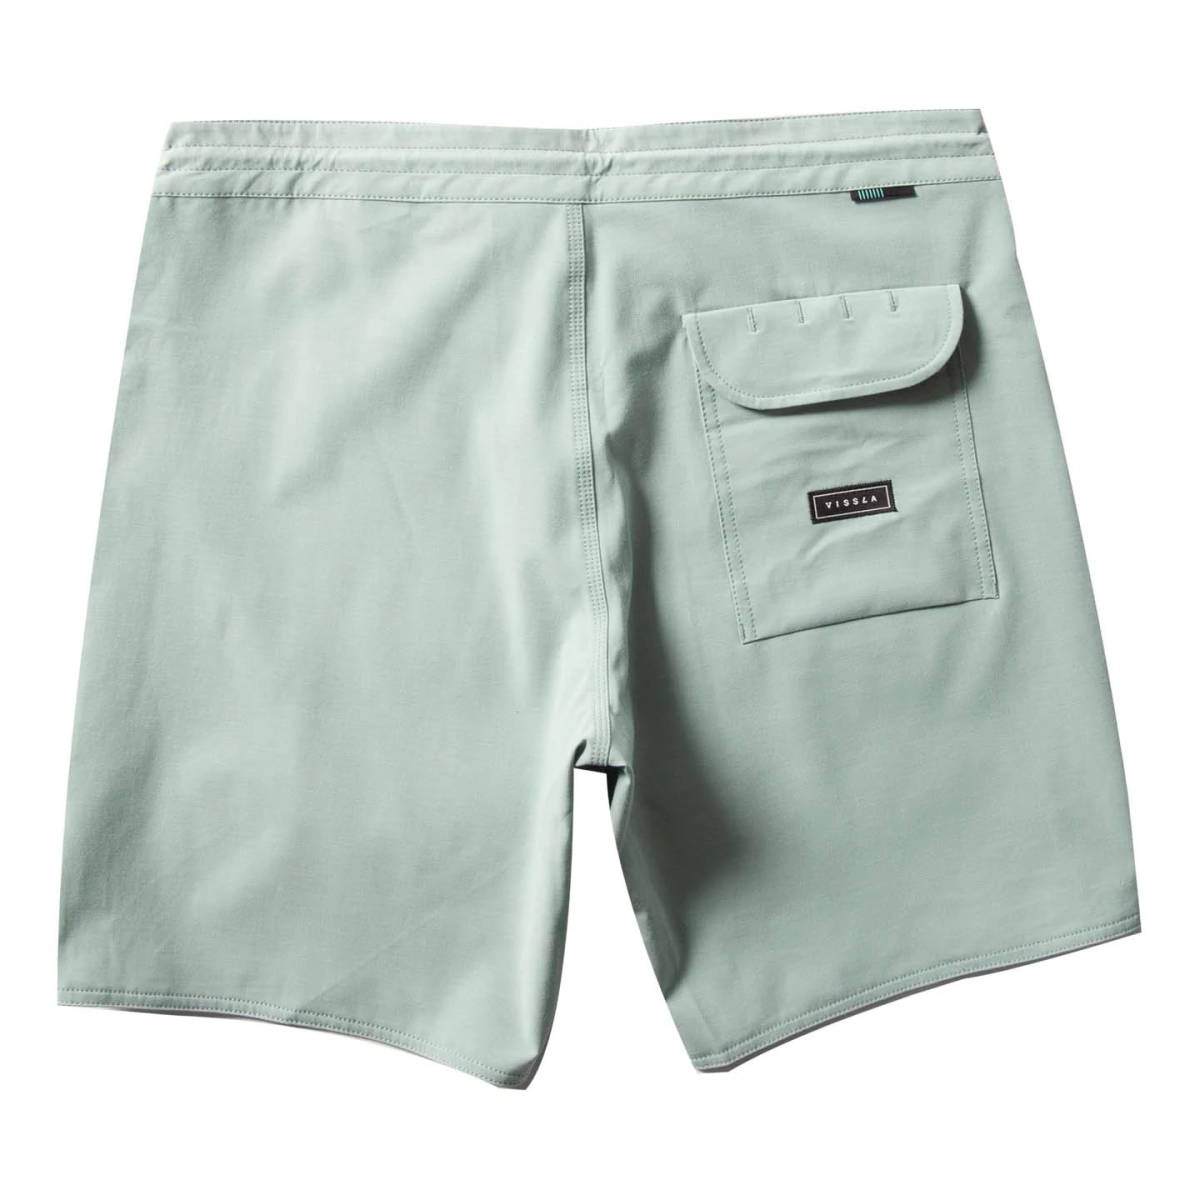 ☆Sale/新品/正規品 VISSLA ”SOLID SETS 18.5” BOARD SHORTS | Color：ALO | Size：28int/70cm | ヴィスラ | ボードショーツ_画像2